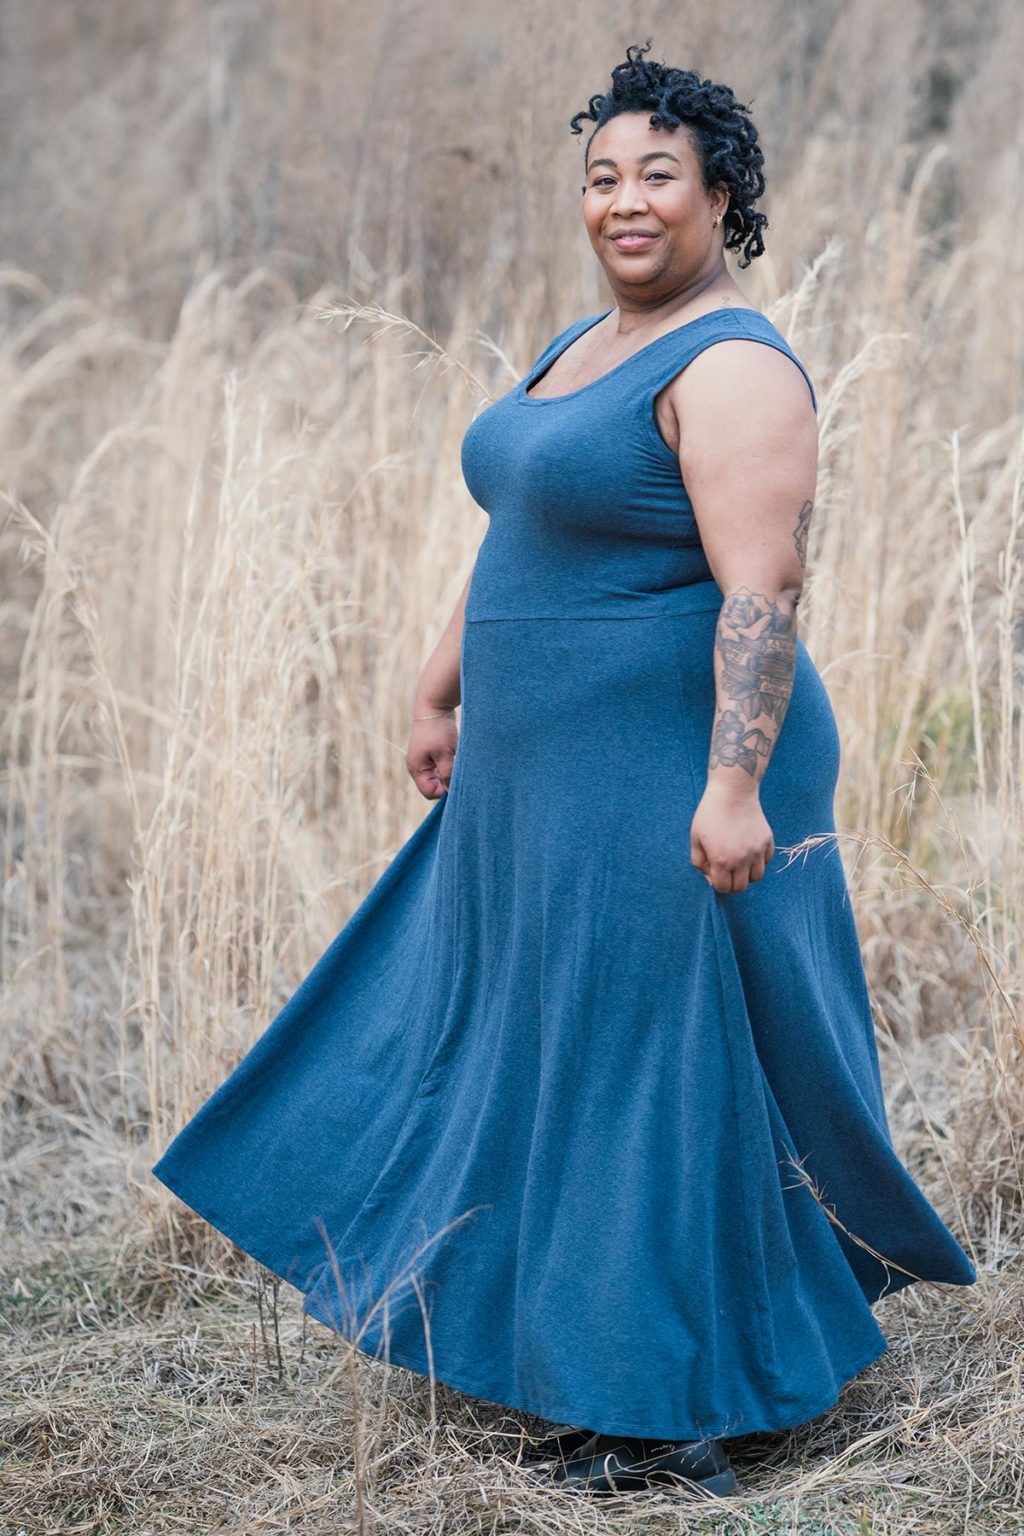 Ashley wears a blue maxi length Stasia Dress standing in the woods